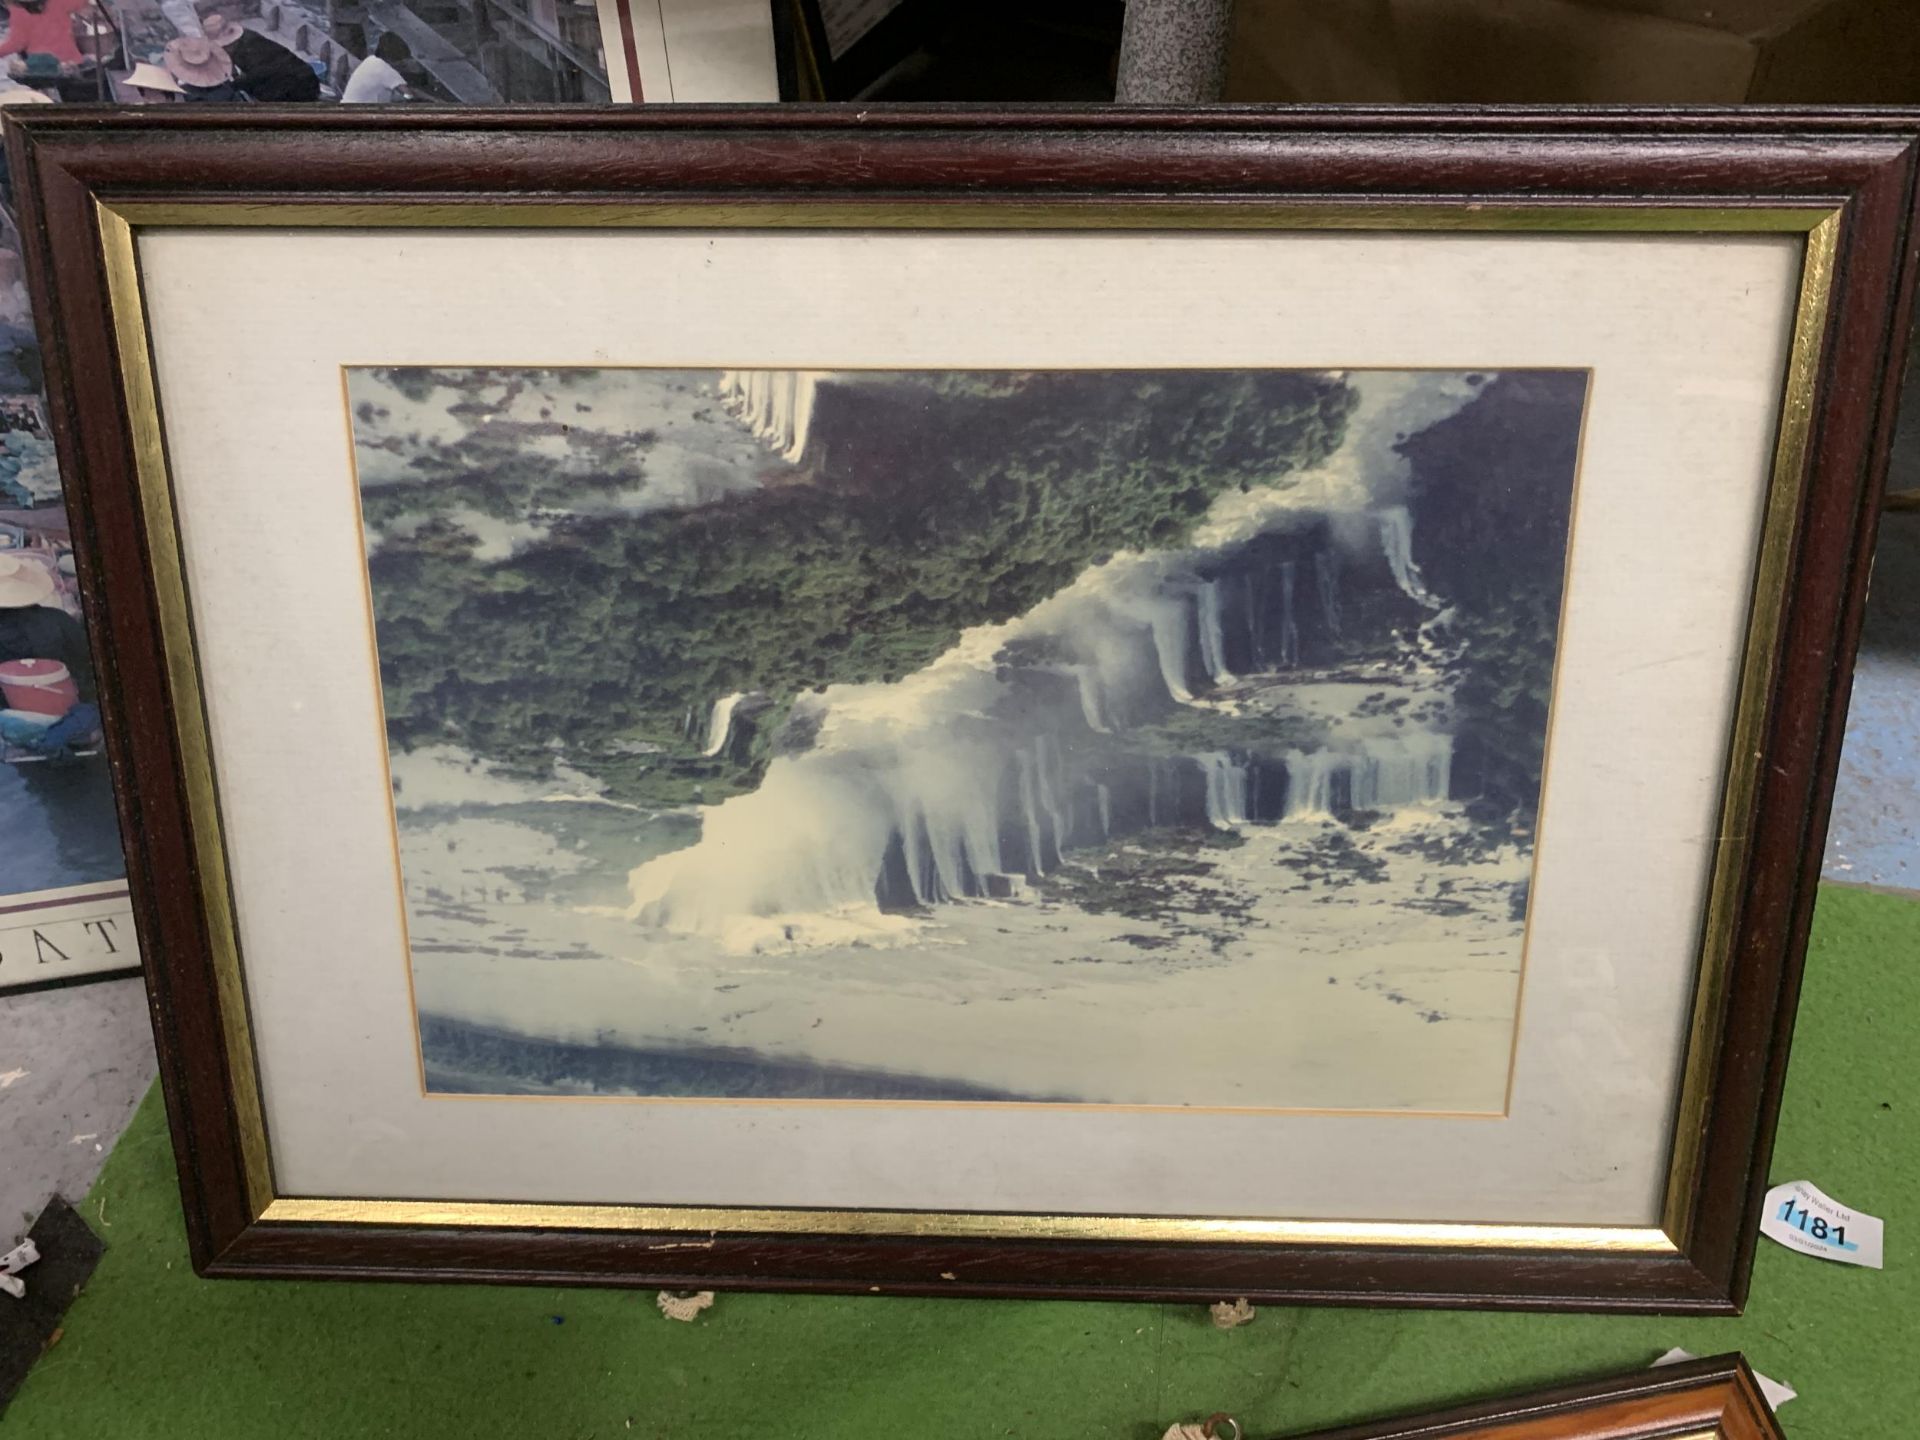 TWP FRAMED PHOTO'S OF WATERFALL SCENES TOGETHER WITH A FRAMED PRINT OF THE "FLOATING MARKET" - Bild 2 aus 4